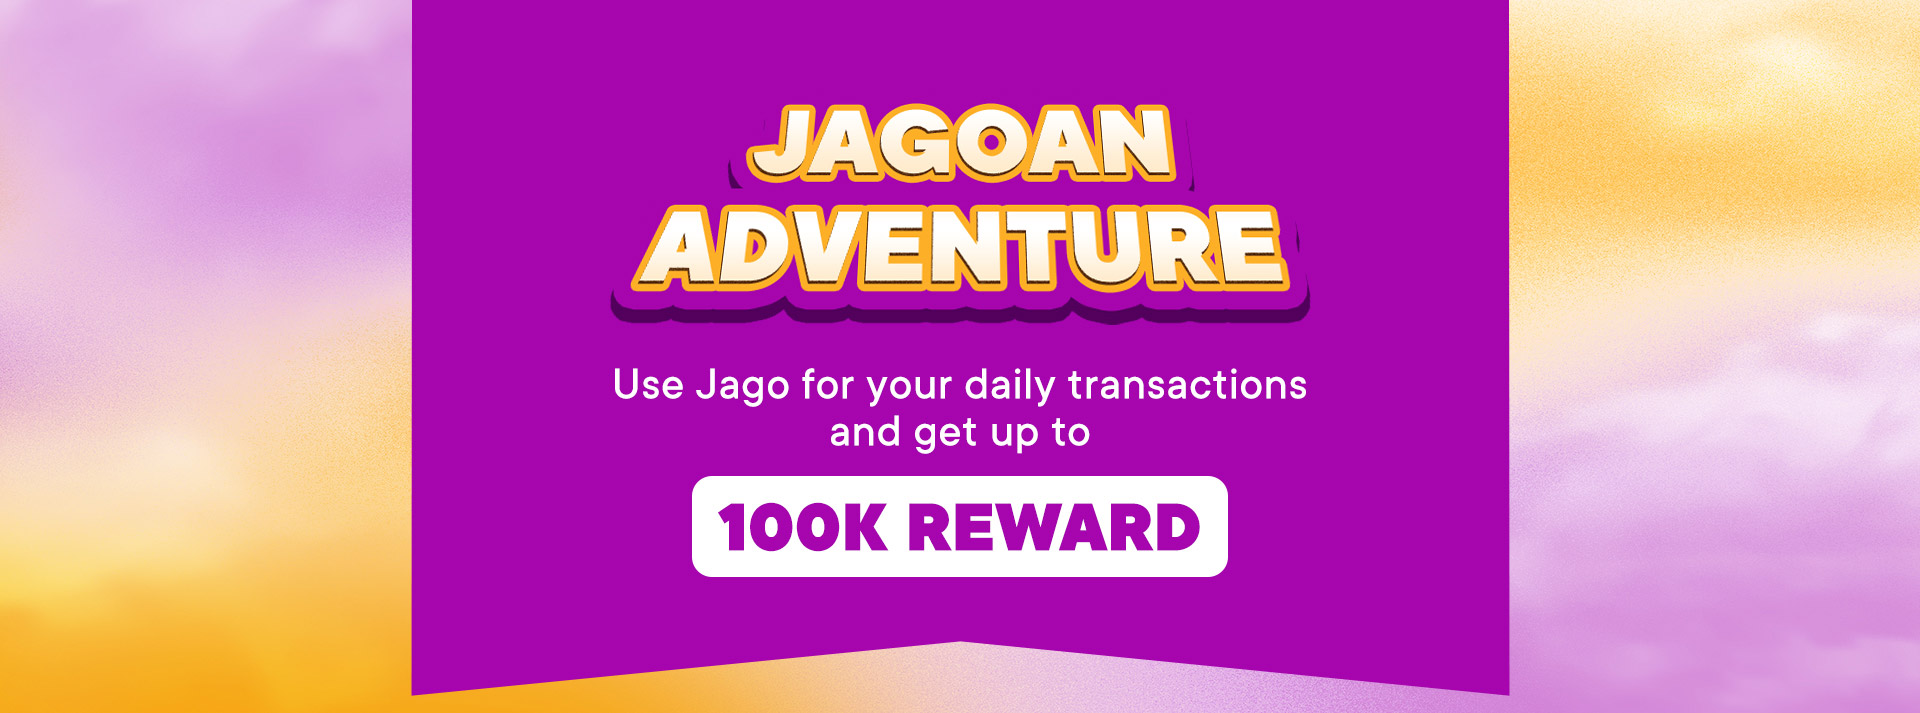 Use Jago for your daily transactions and get up to 100K reward.